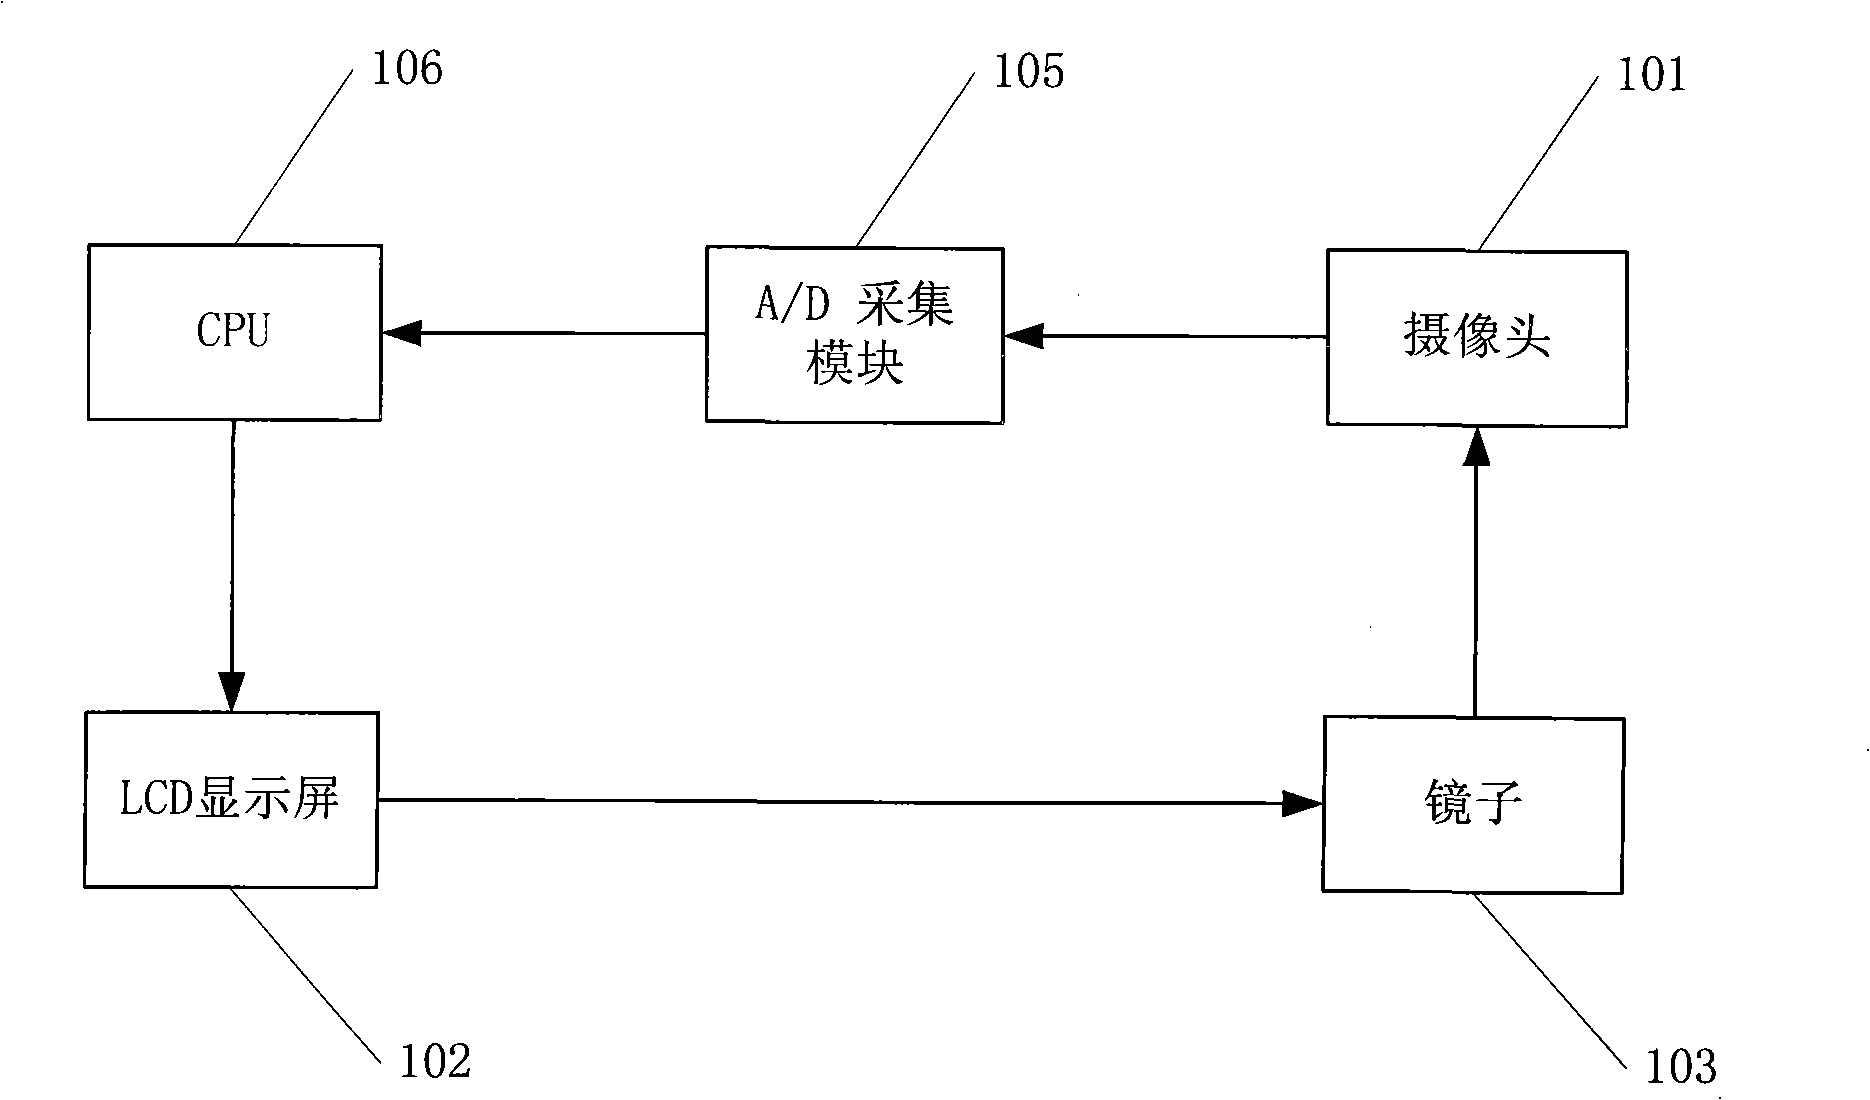 Self-test method for LCD display with camera